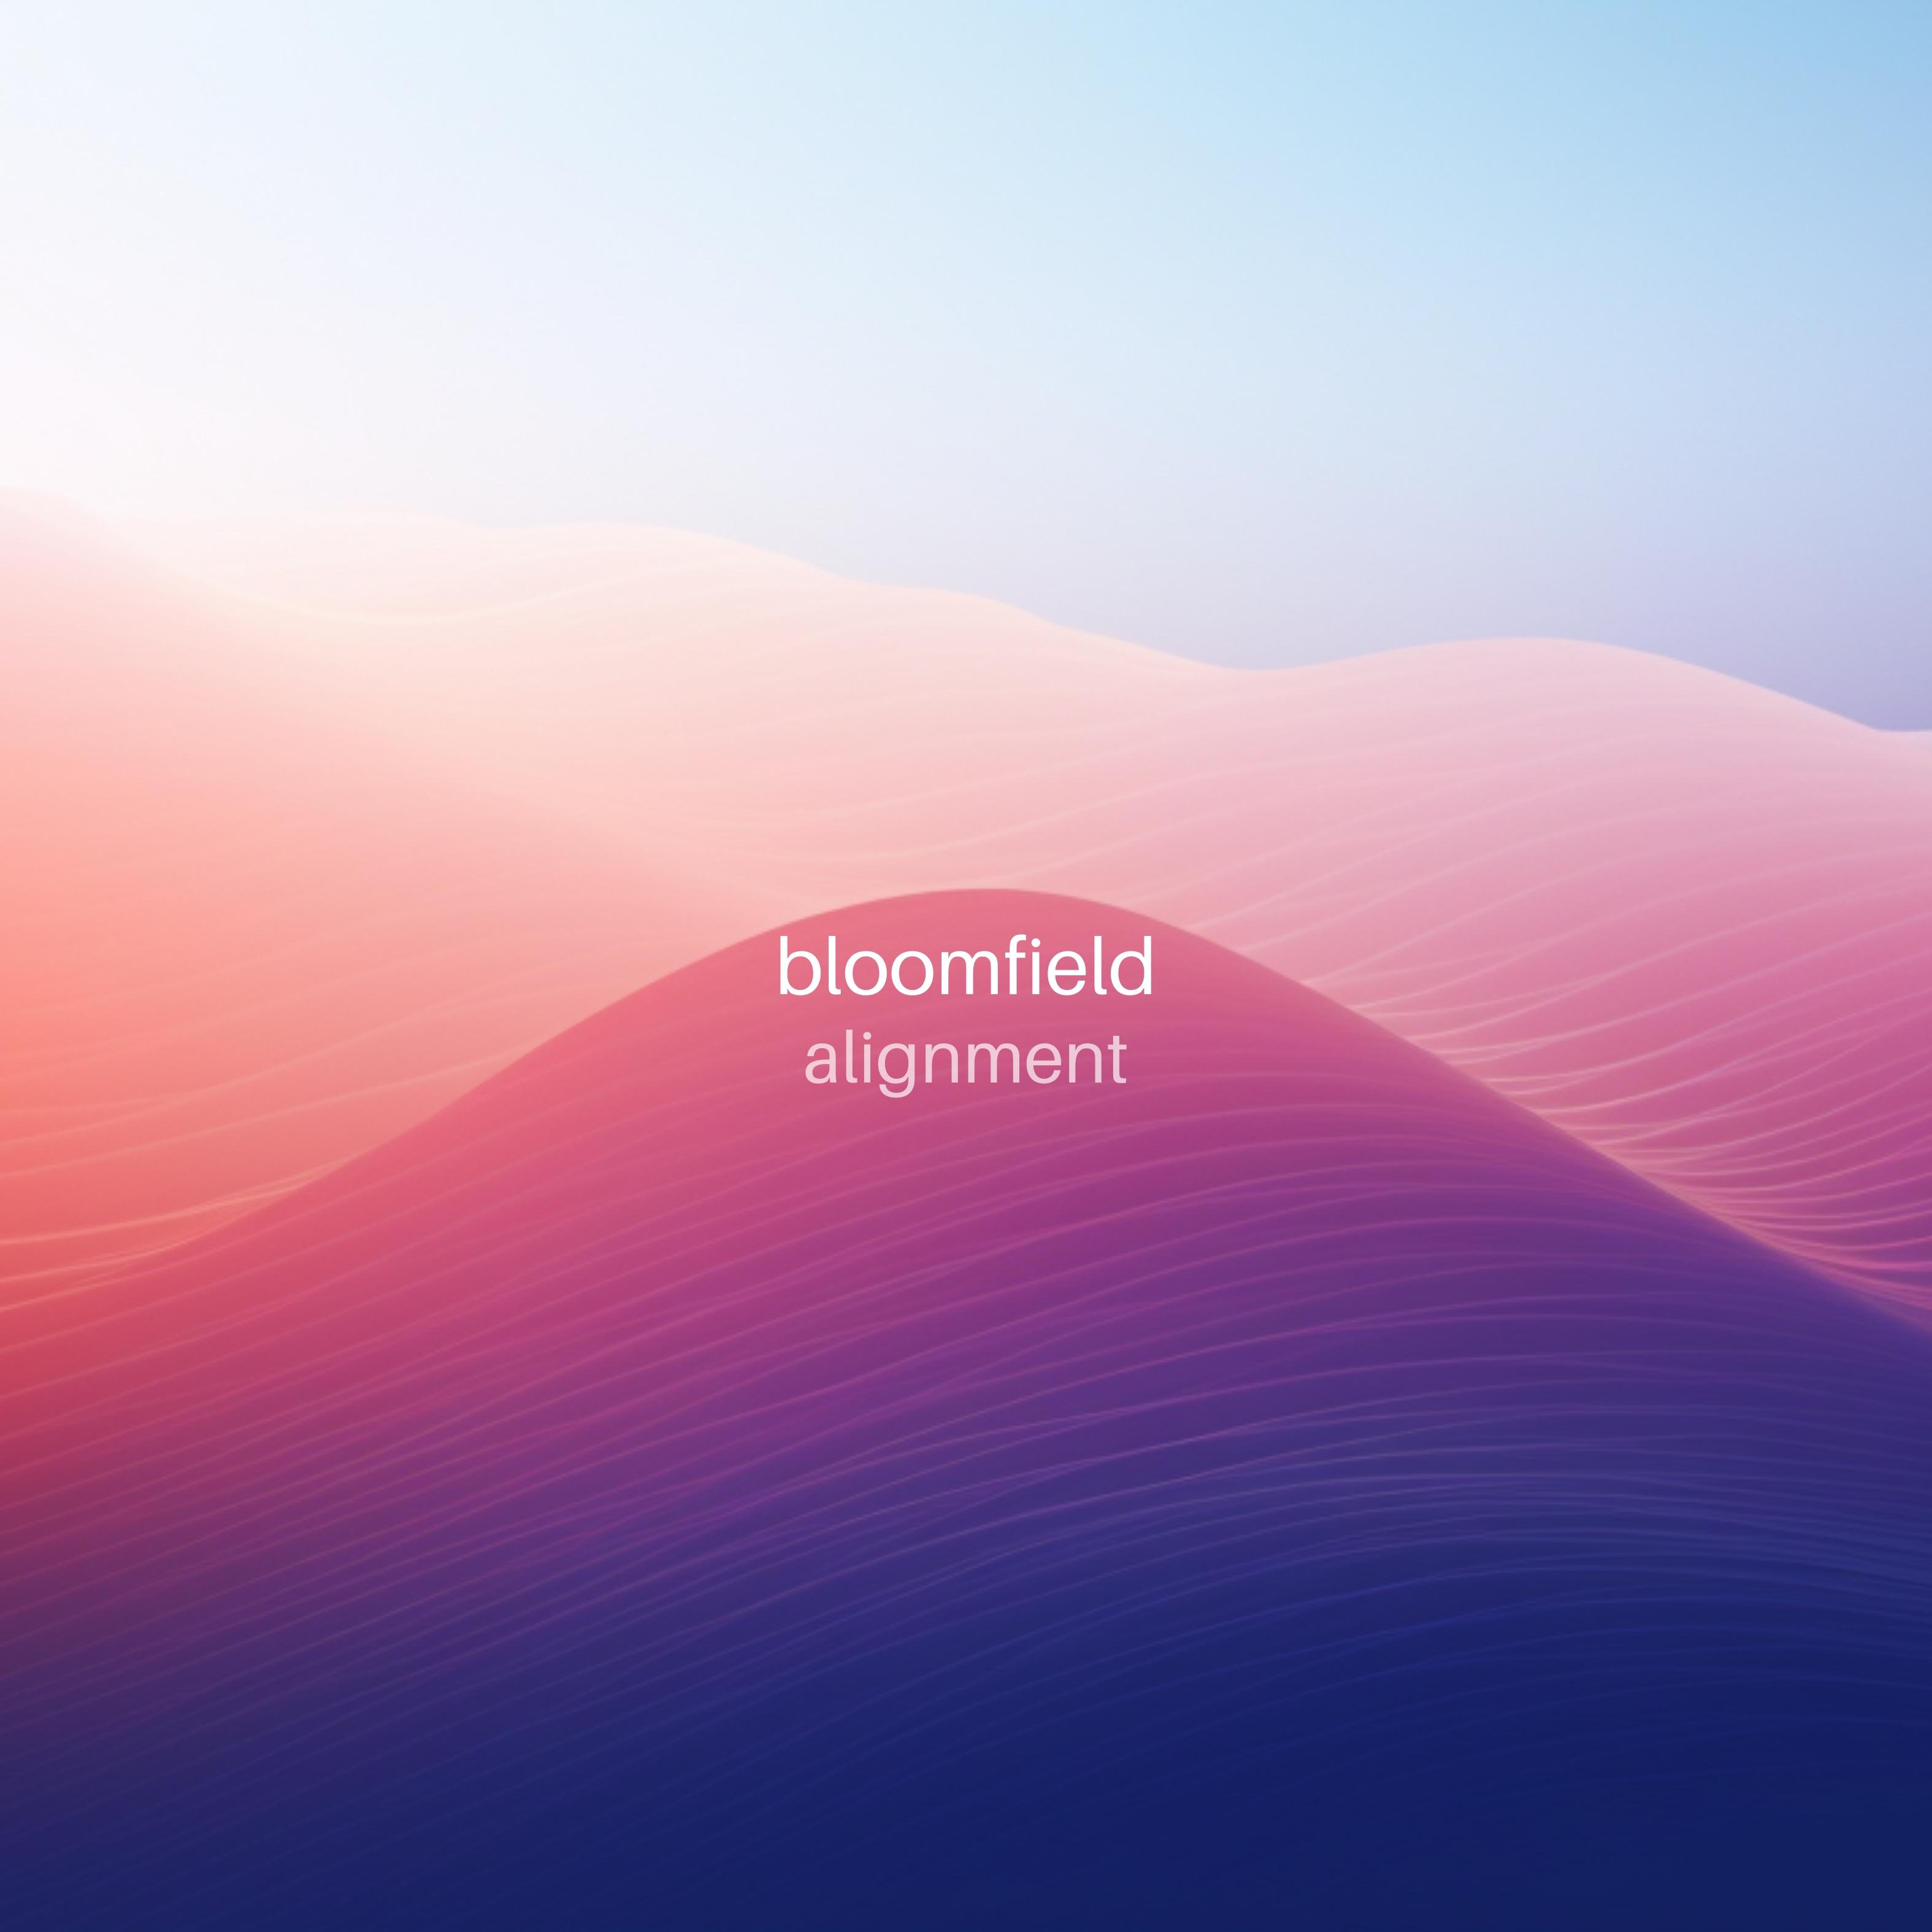 Bloomfield - Alignment (River)